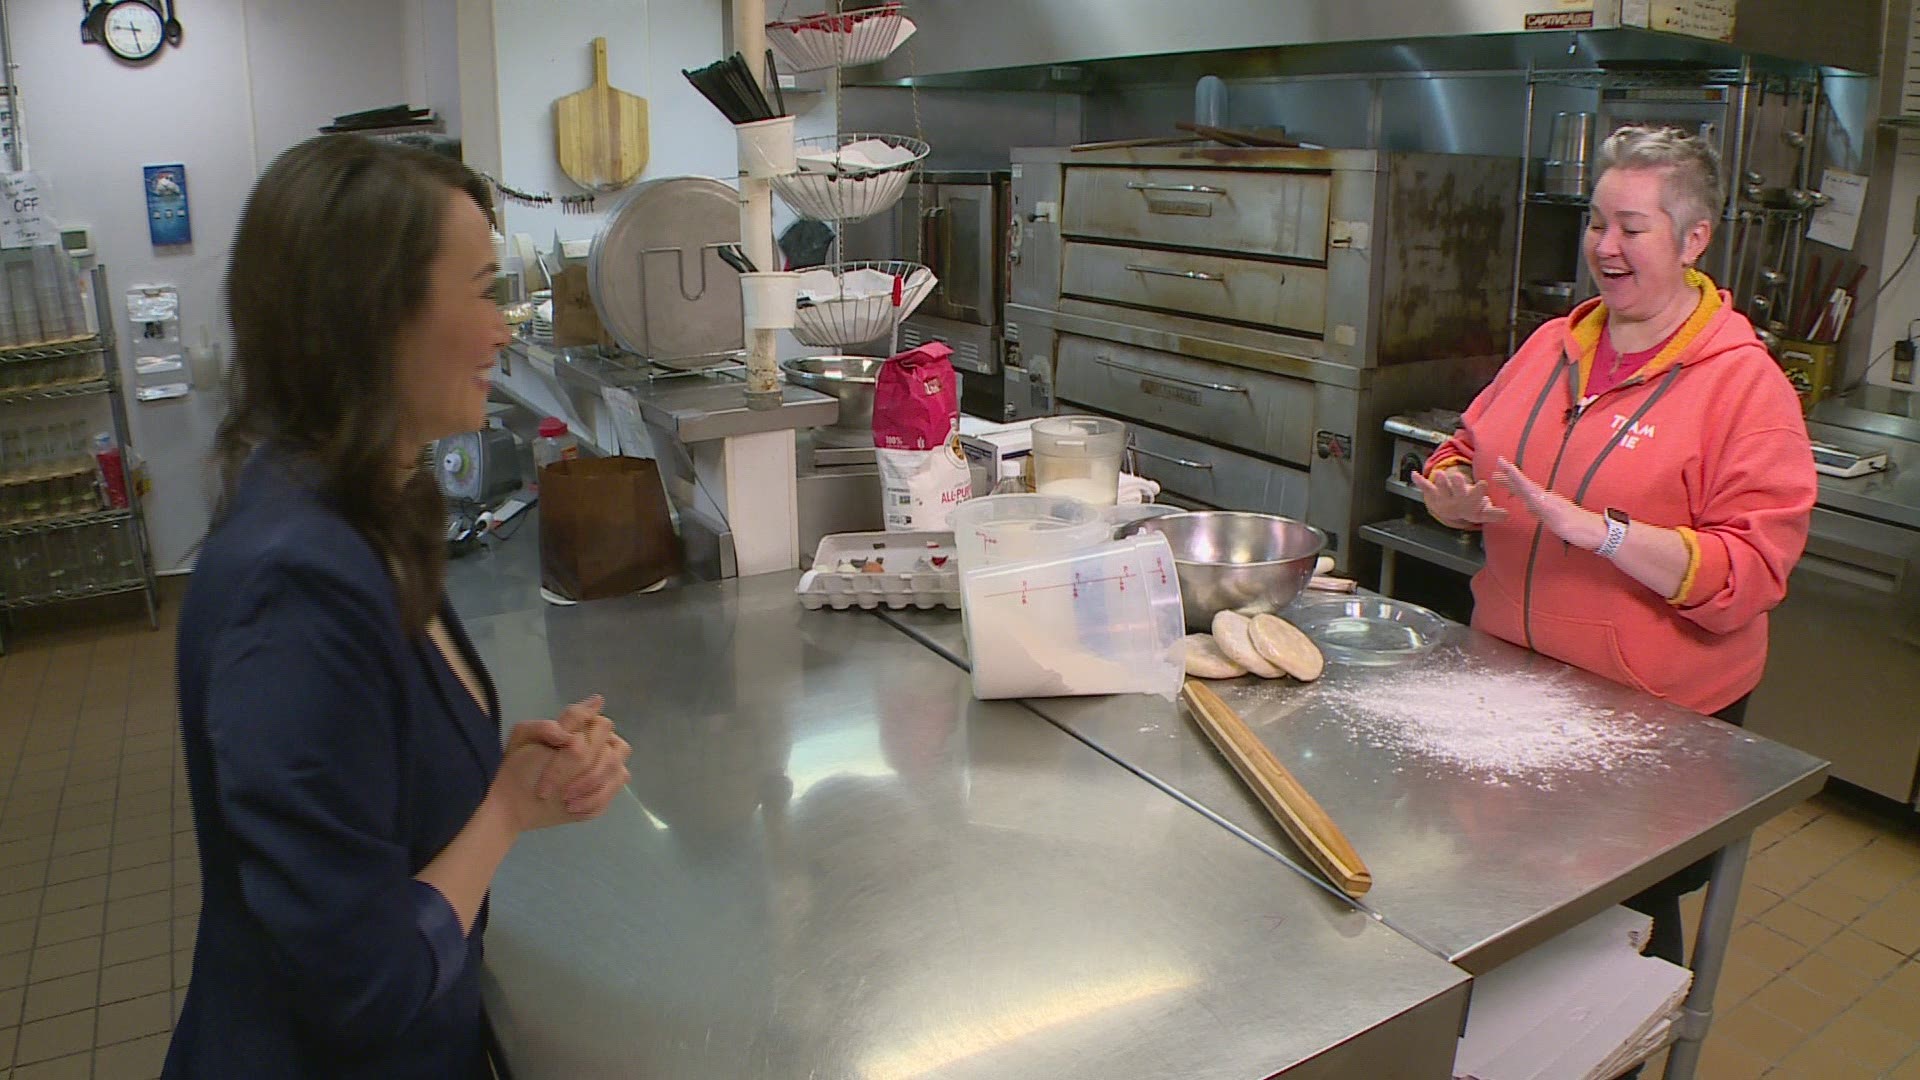 Owner Rachel Swan shows us how to make the famous pie crust used at Pie & Mighty in Minneapolis.